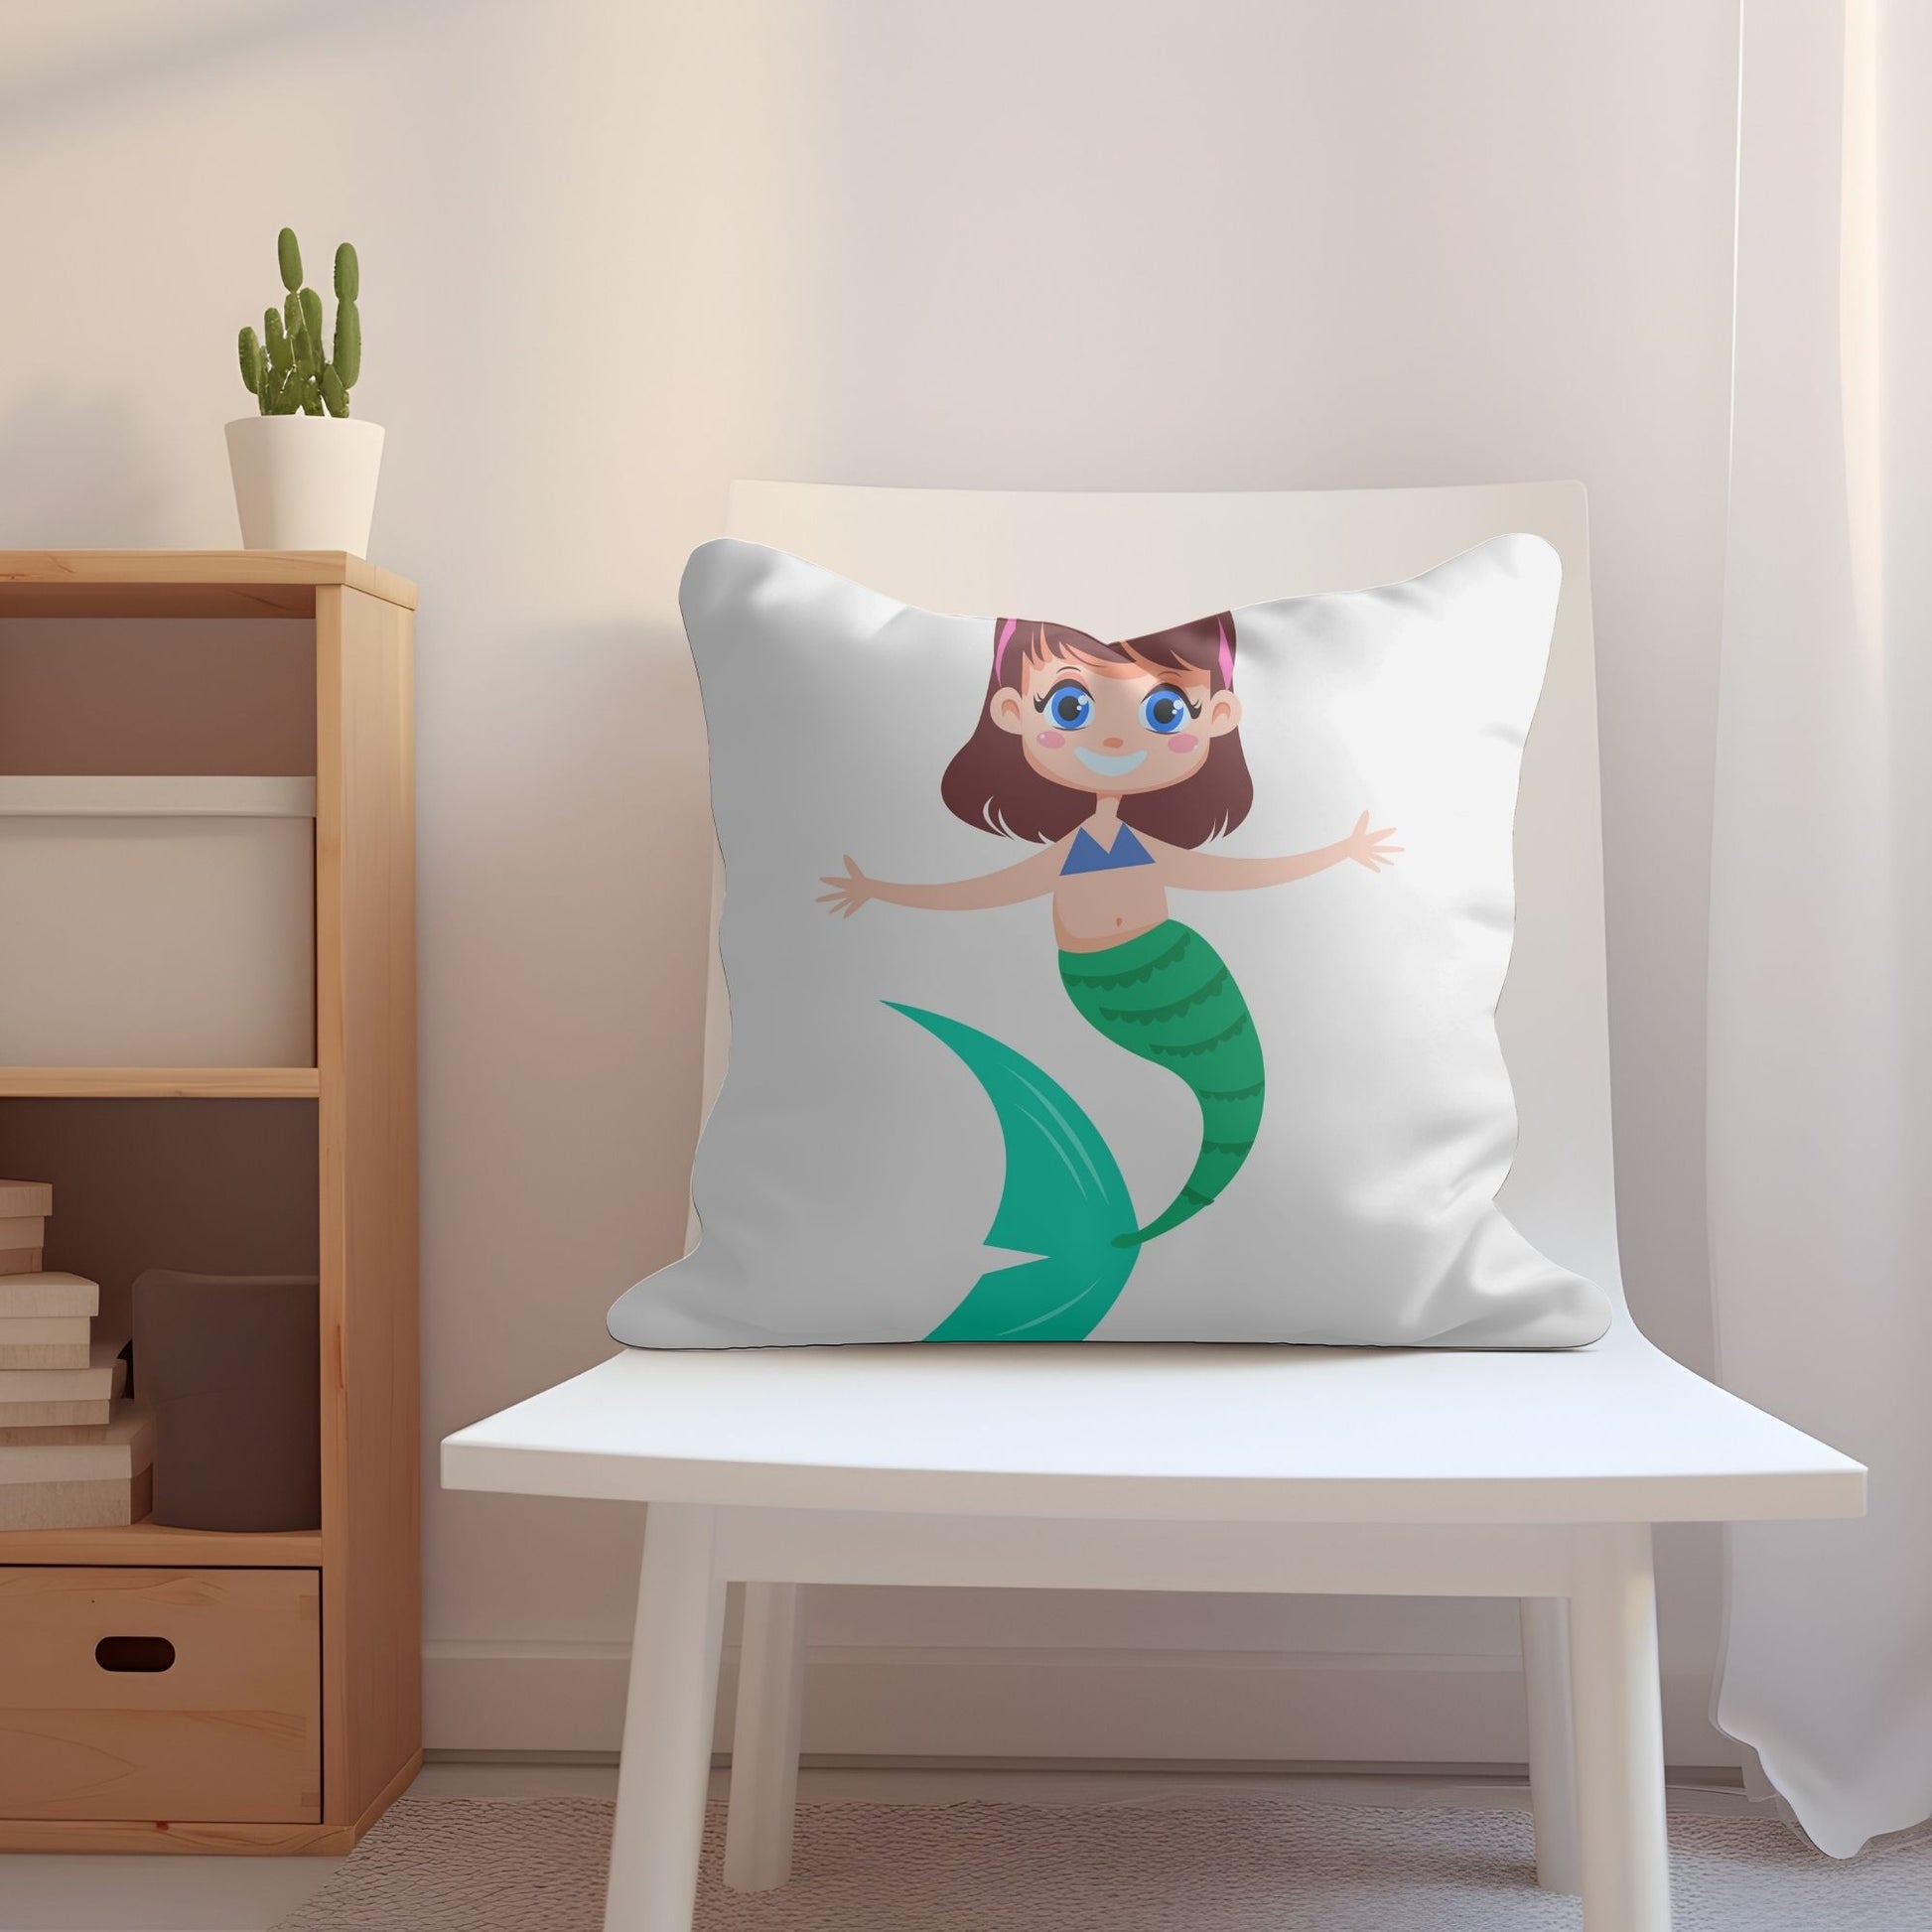 Cozy pillow featuring a charming mermaid motif for children's comfort.